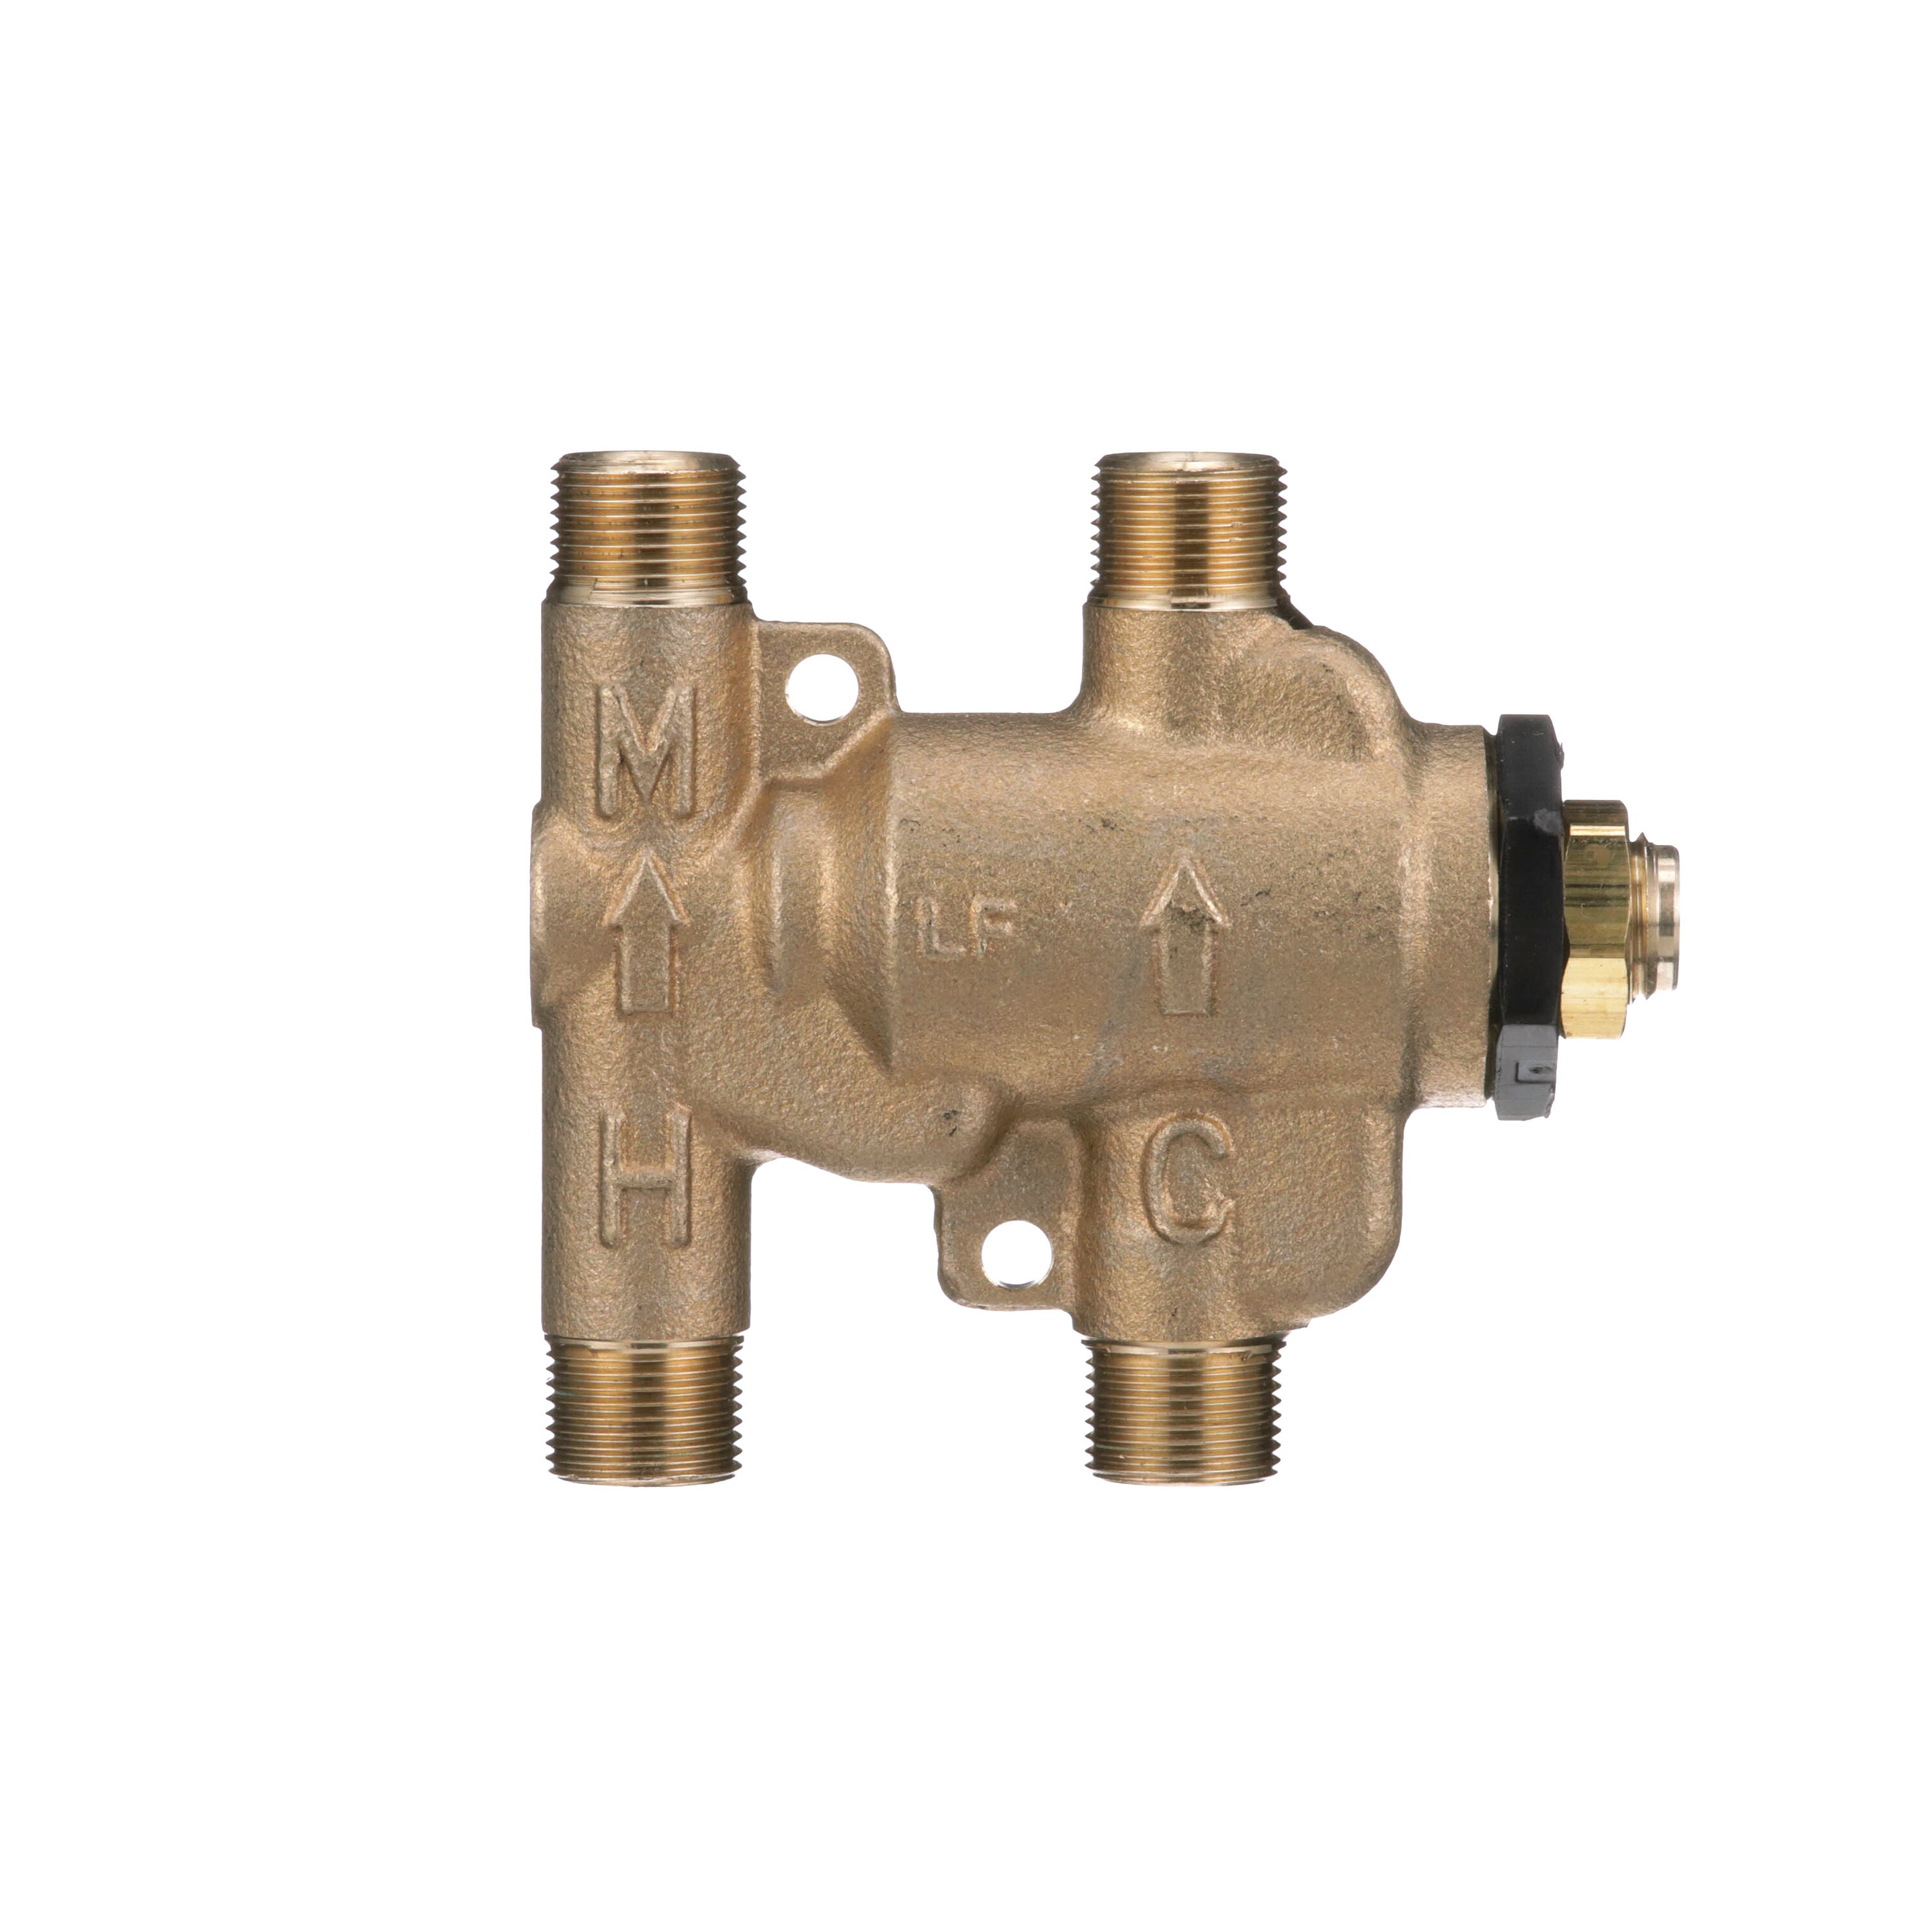 THERMOSTATIC MIXING VLV 3/8 COMPR BRASS LF